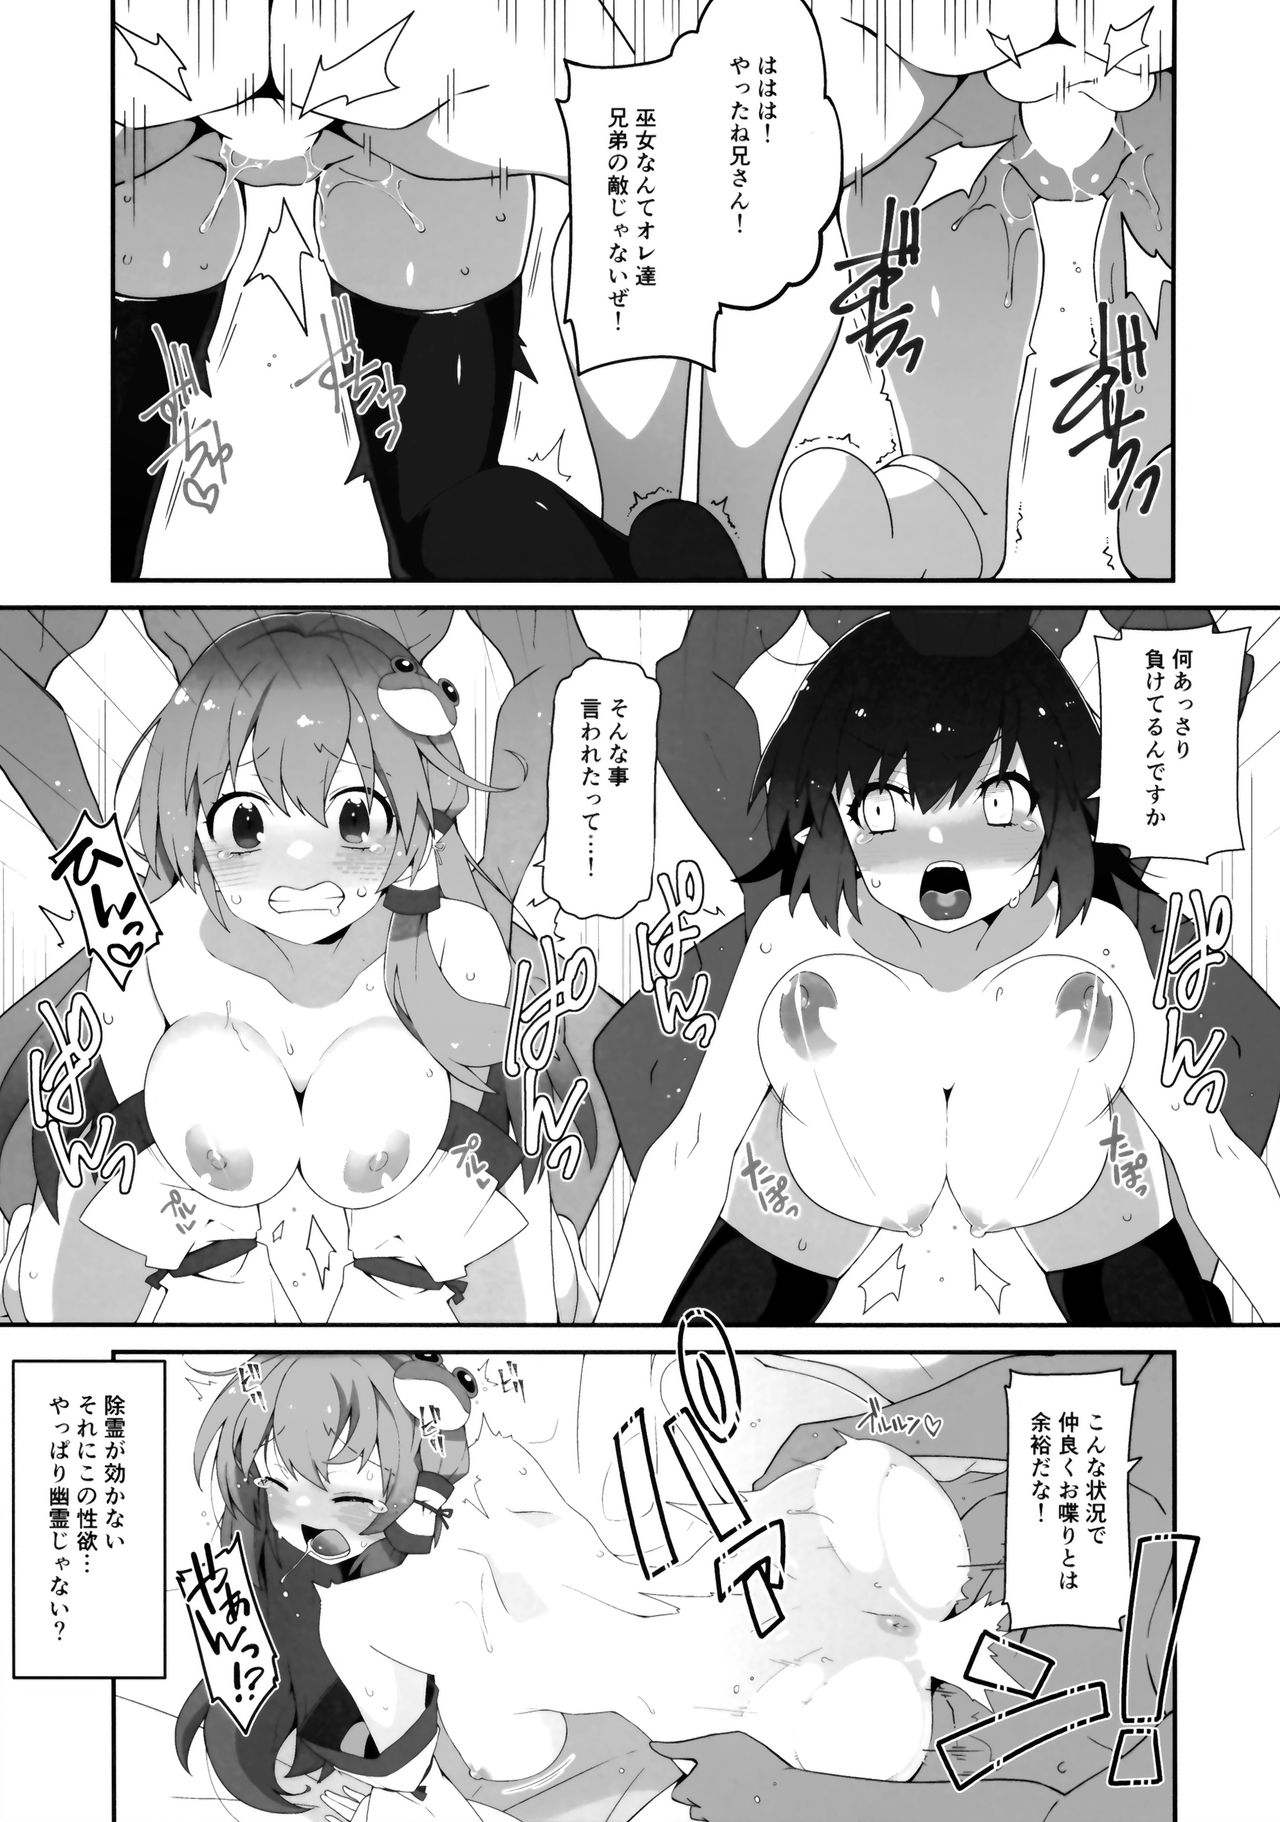 (C96) [Cola Bolt (Kotomuke Fuurin)] RE: I AM (Touhou Project) page 20 full